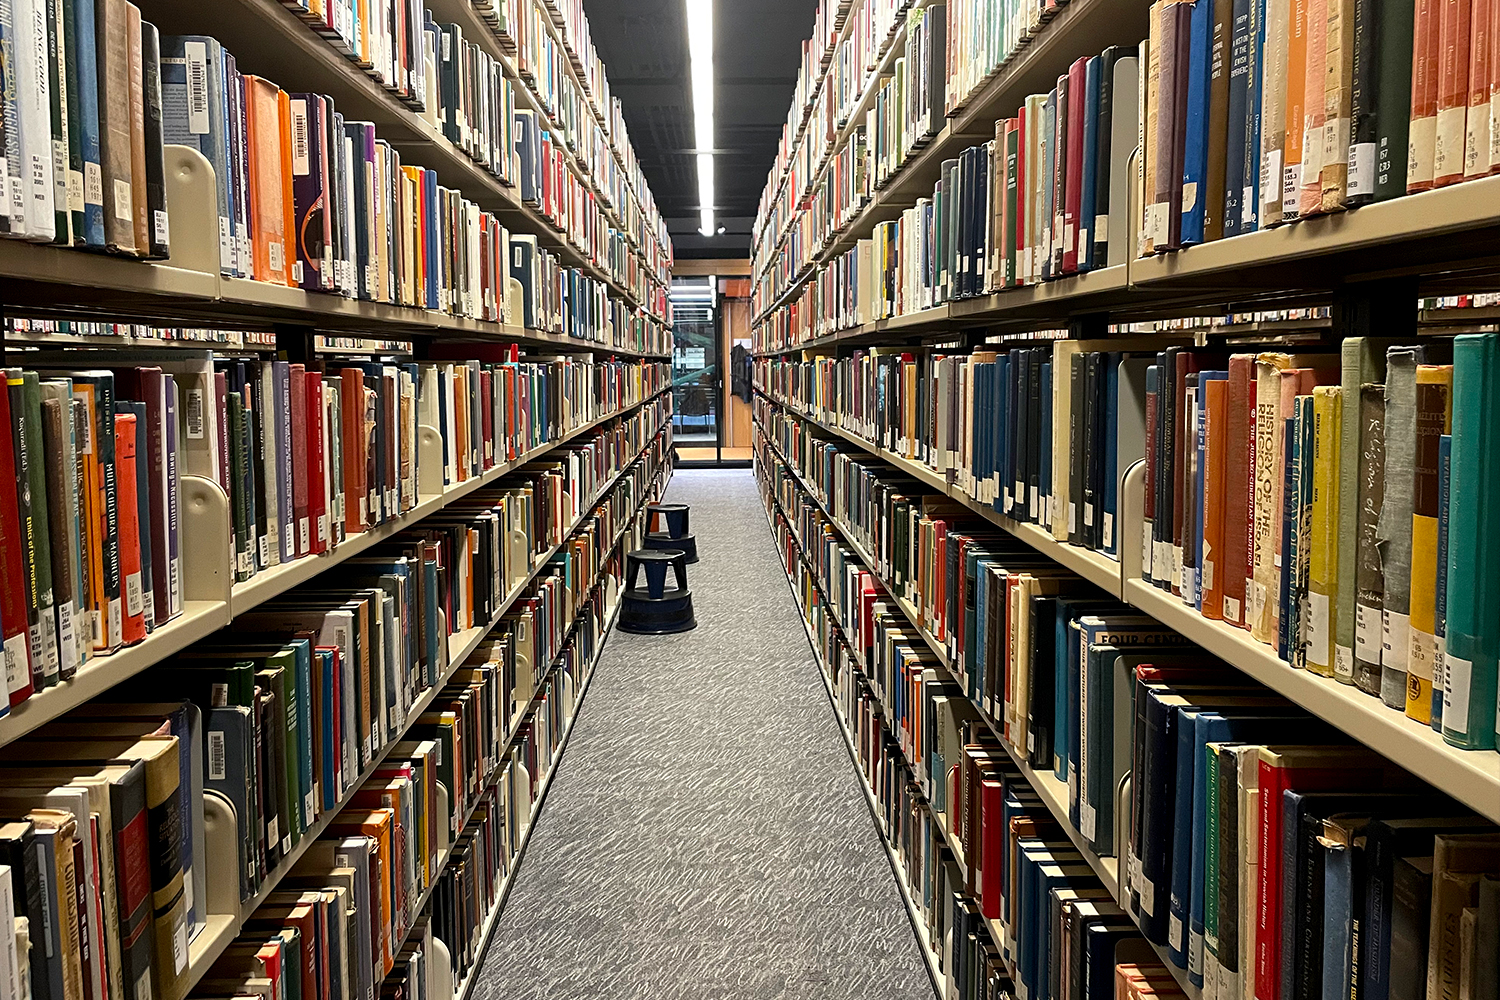 view of the concordia library books